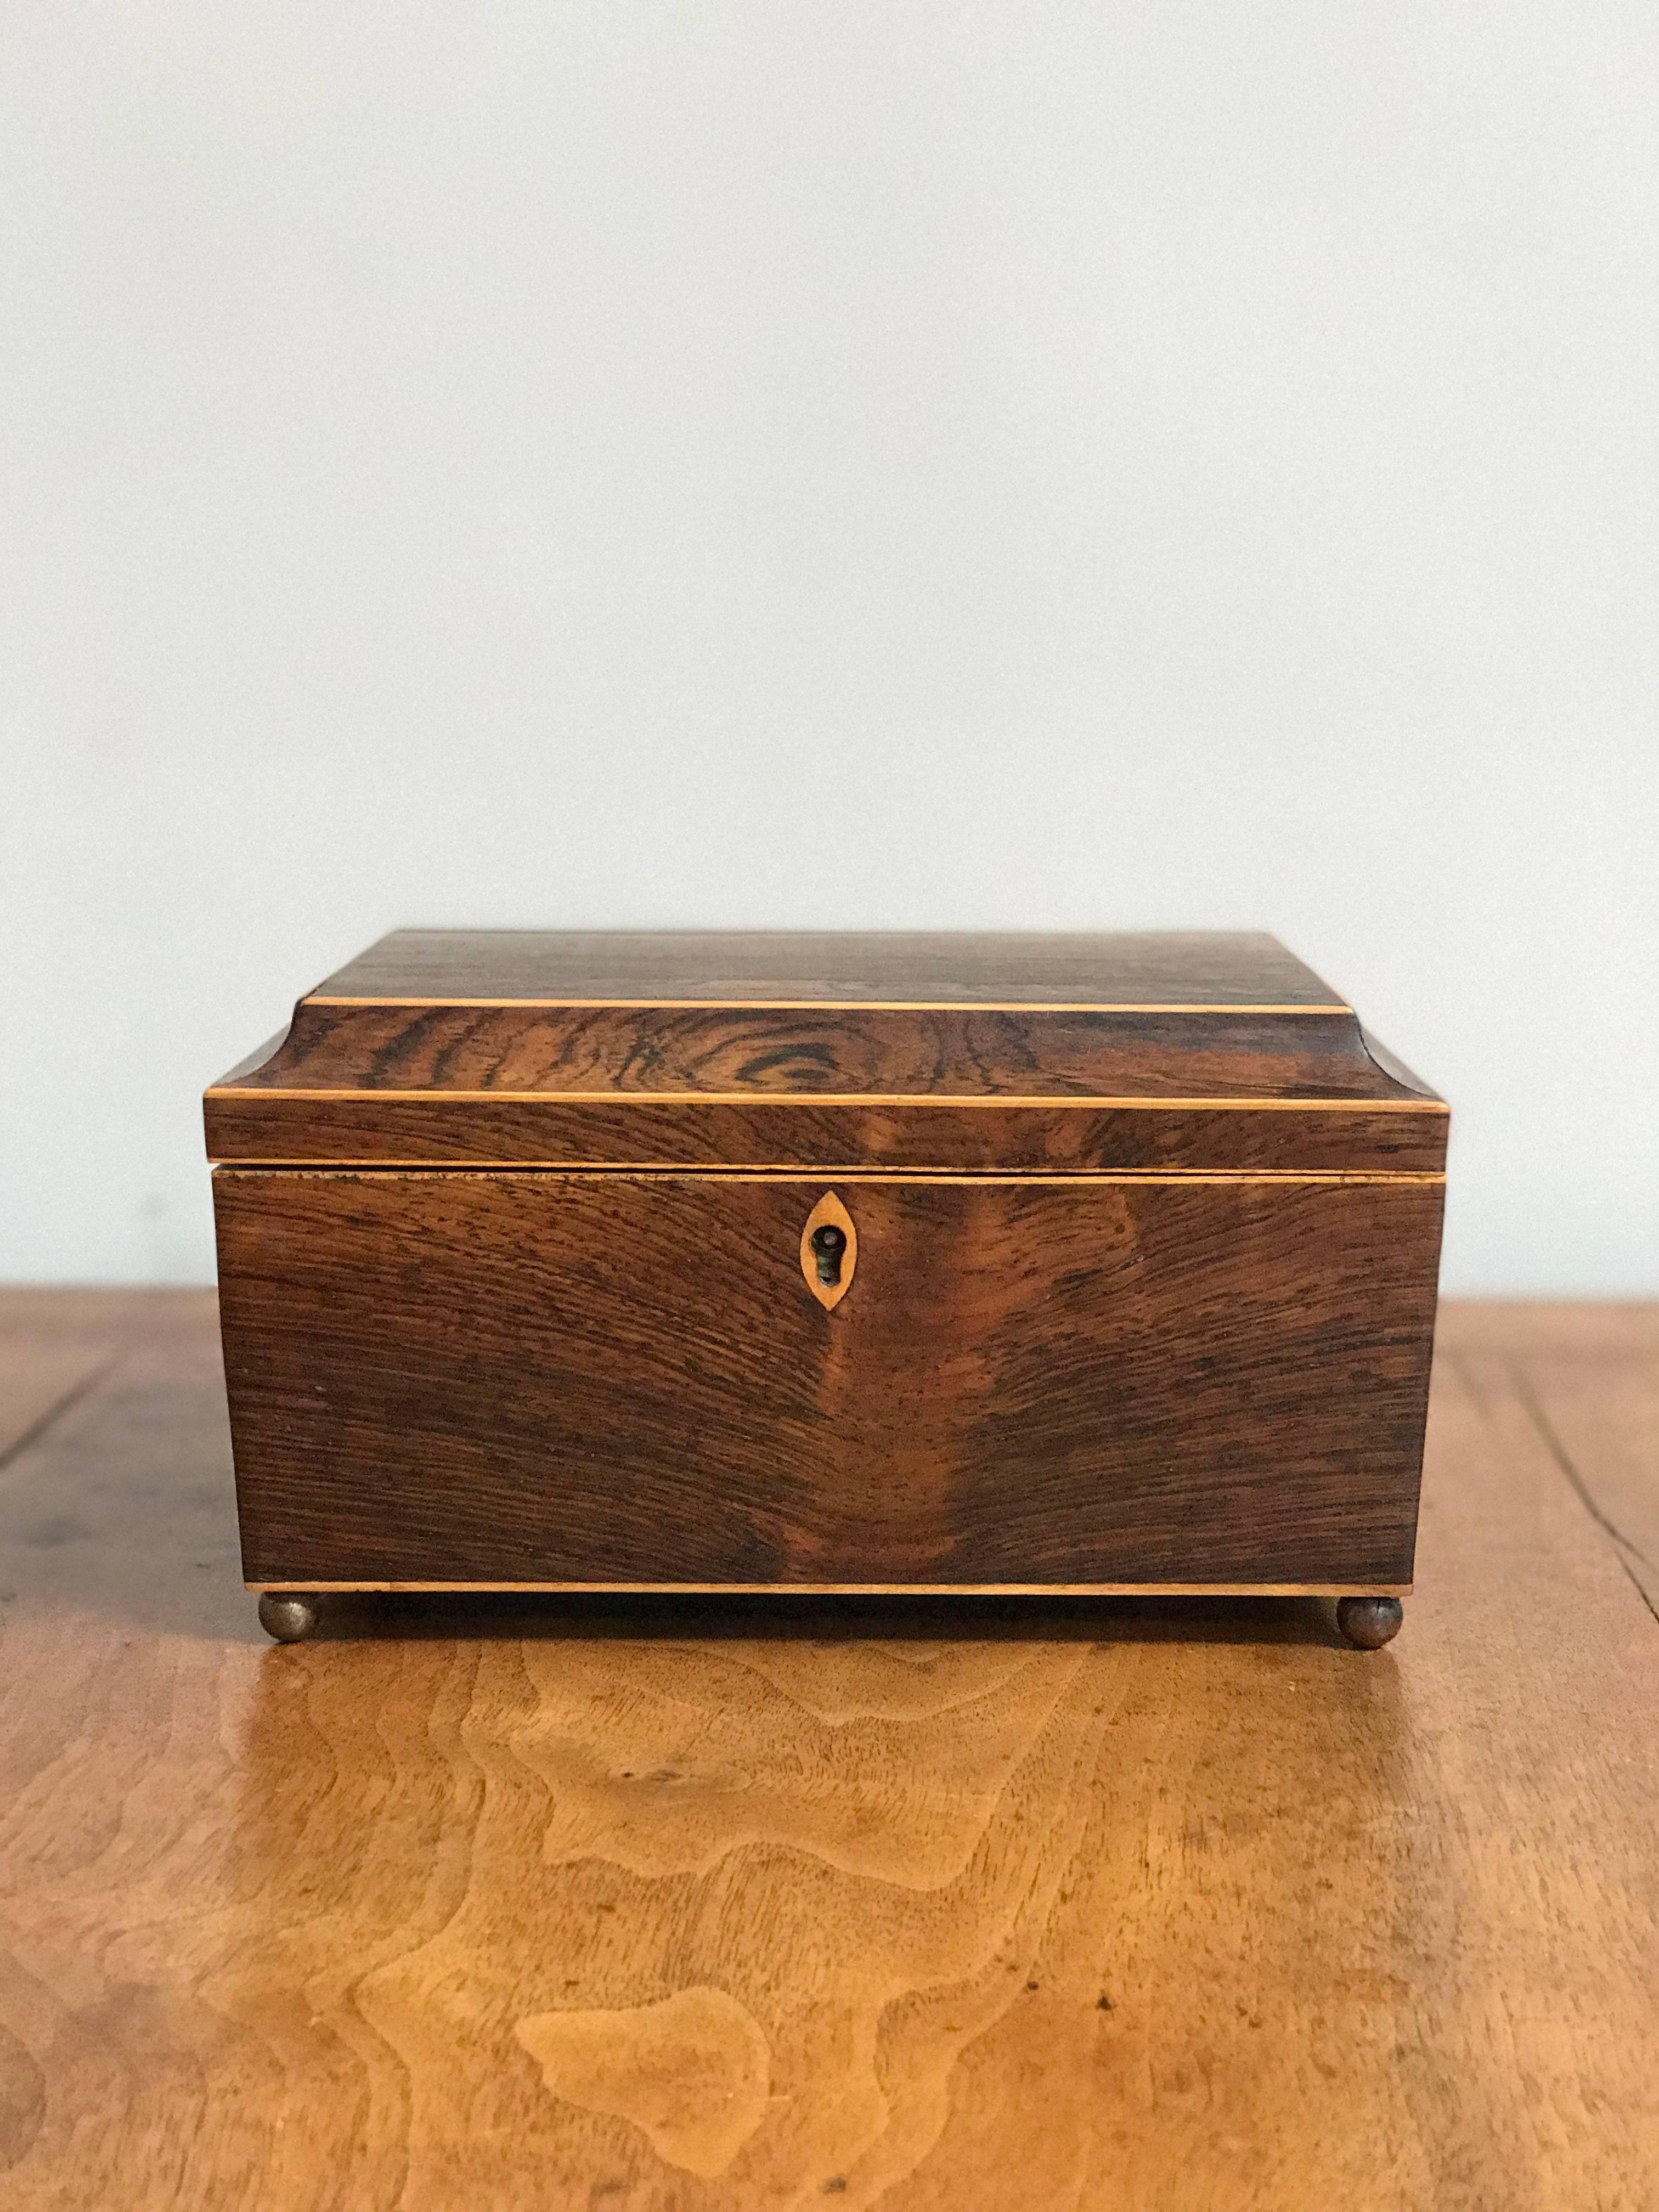 1820s rosewood casket box from England. 